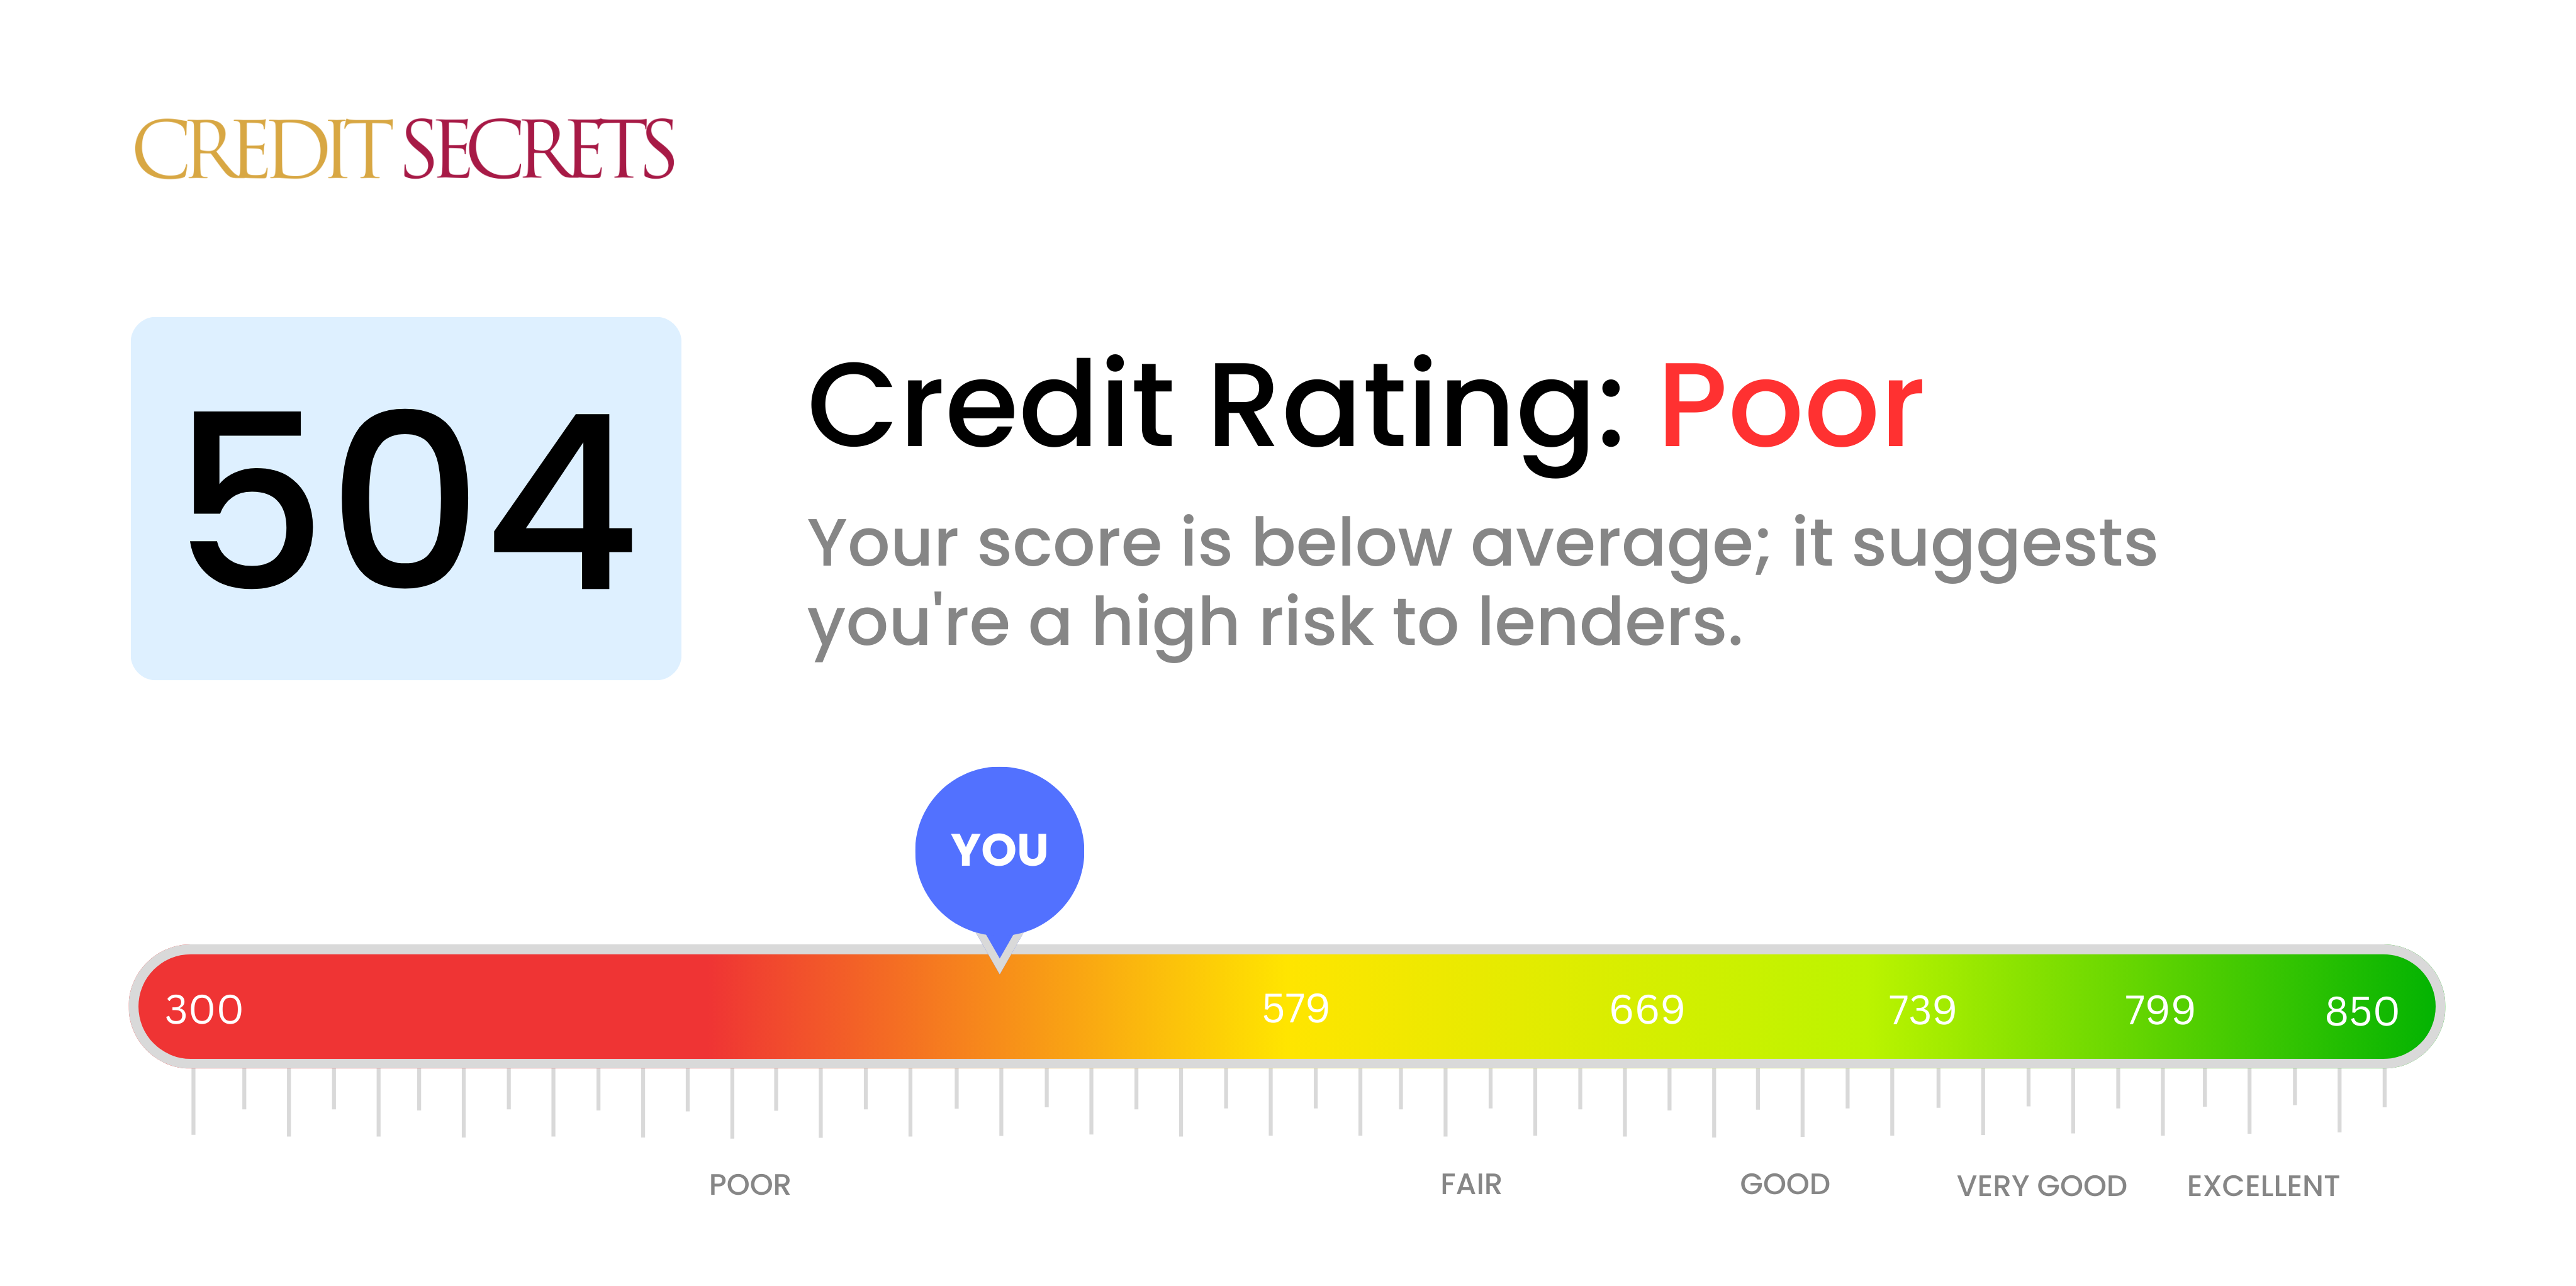 Is 504 a good credit score?